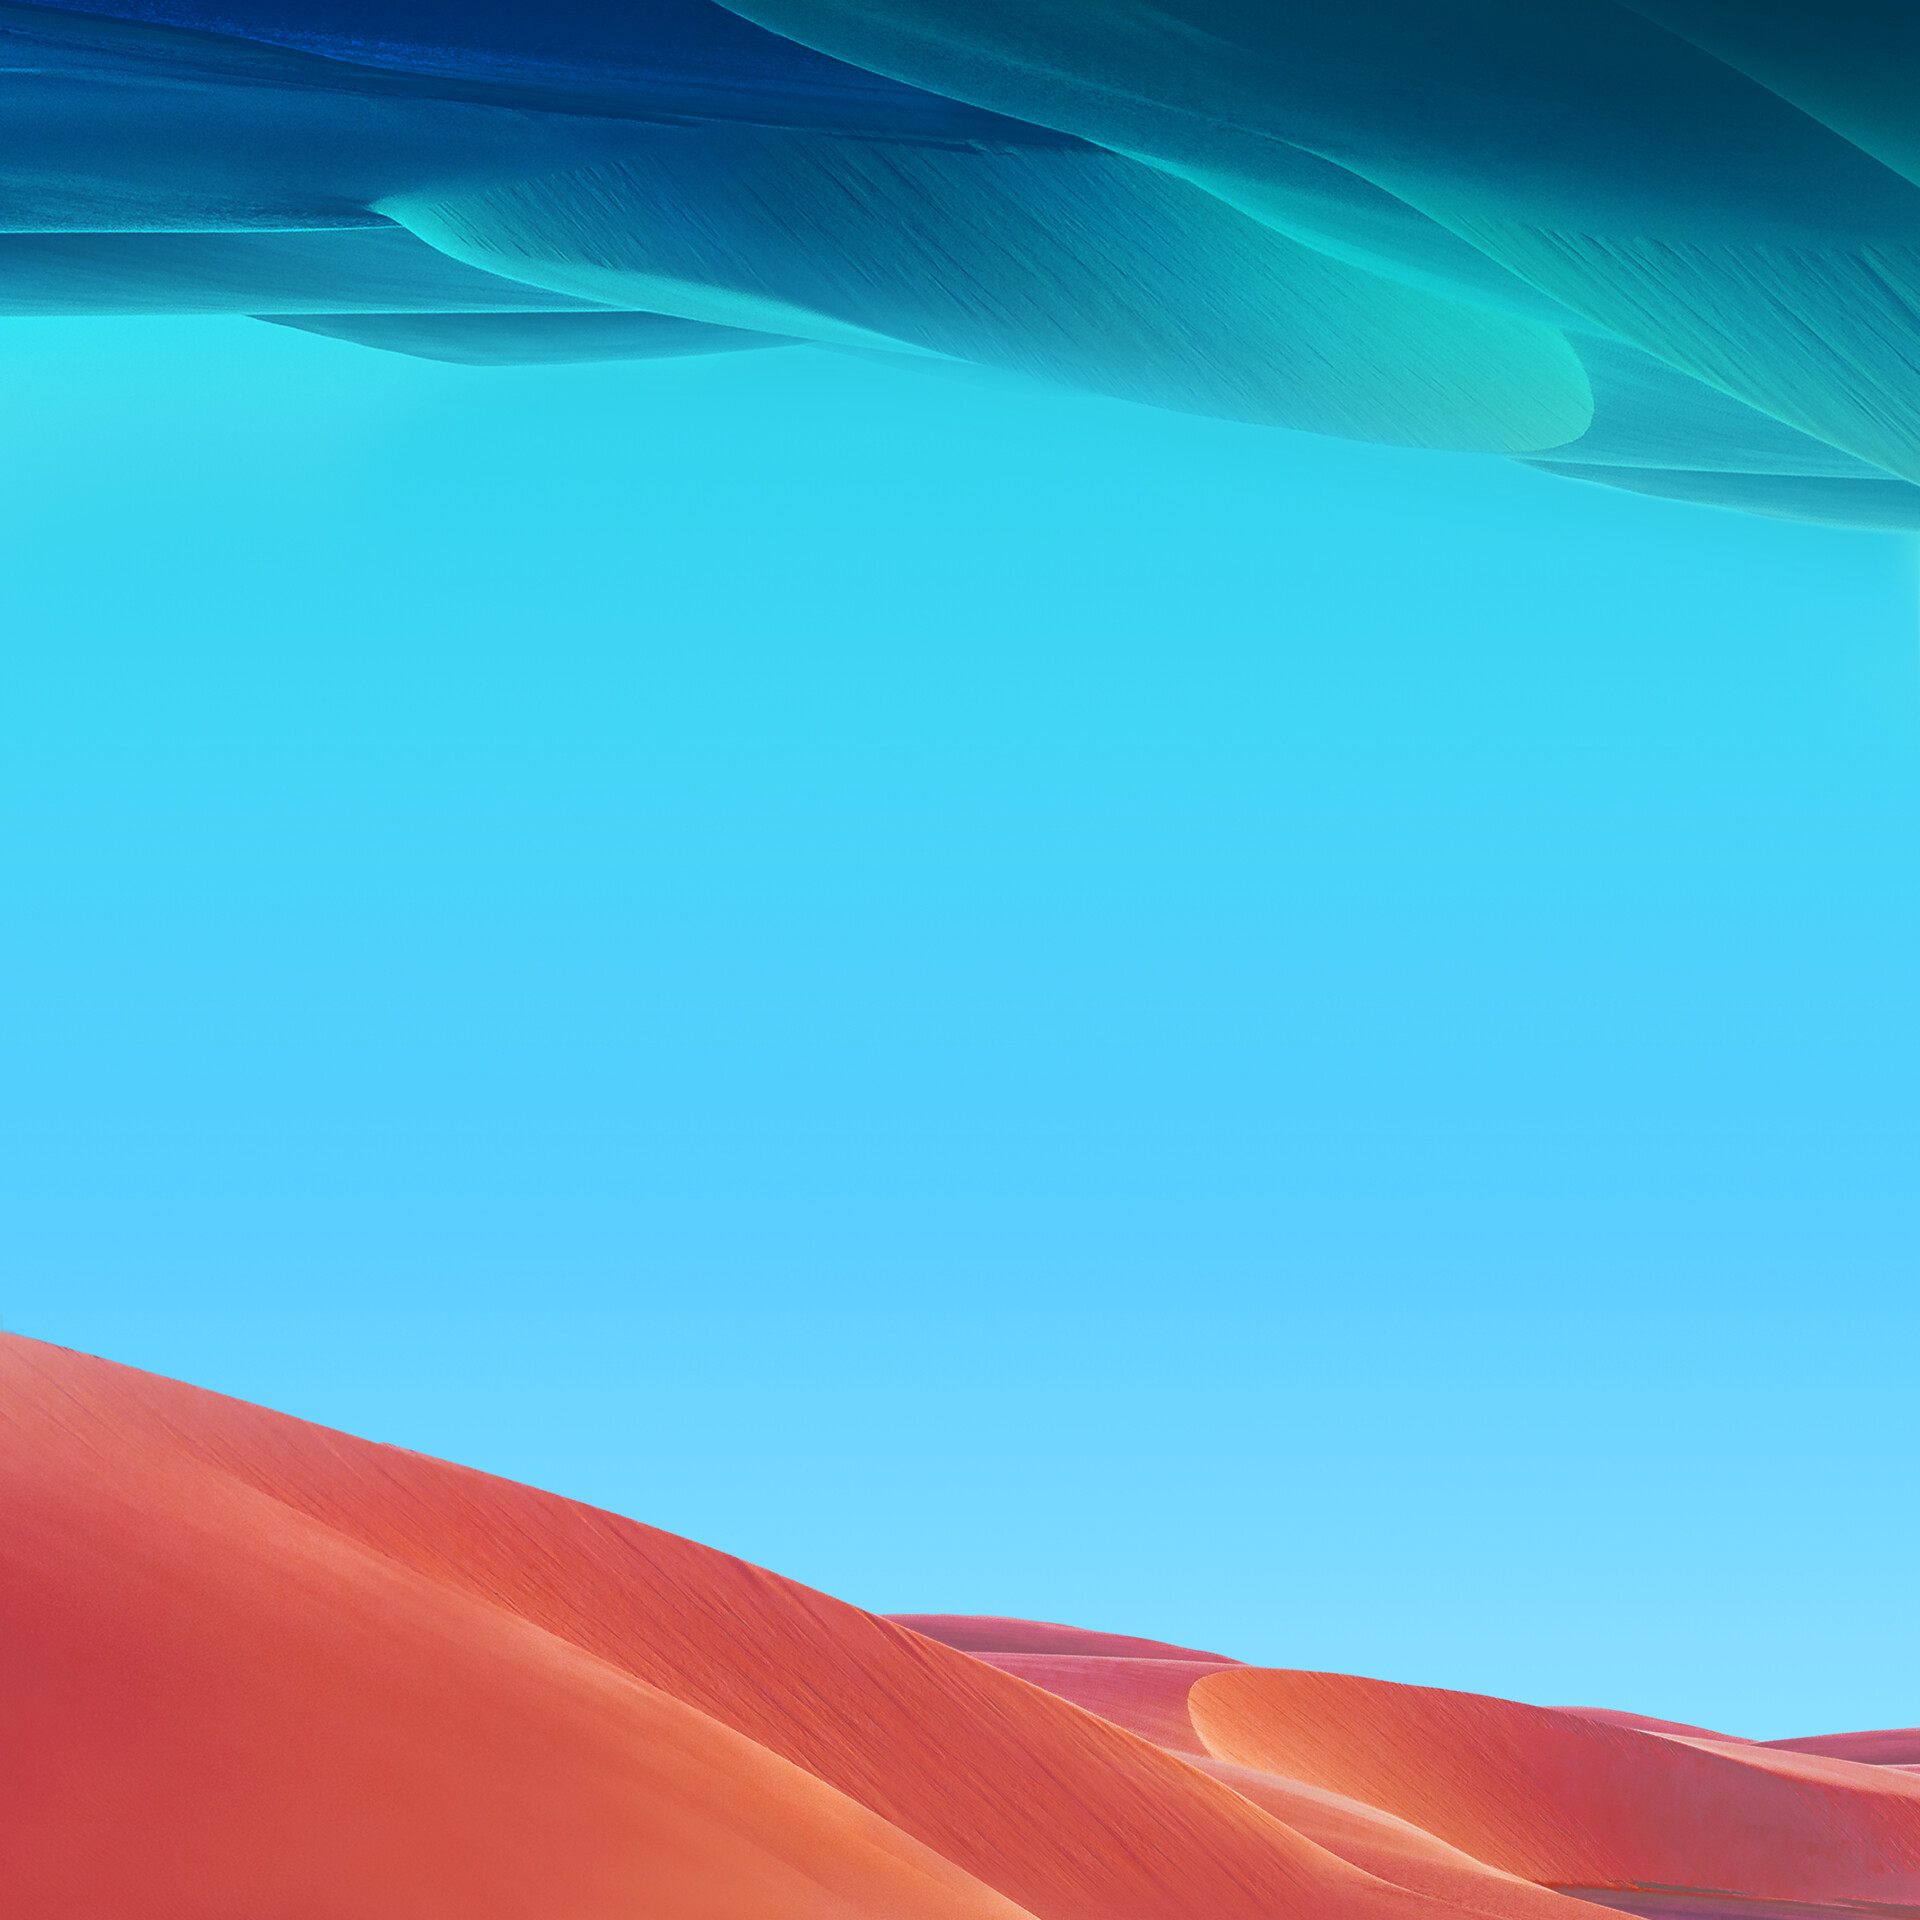 Samsung Galaxy M10 M20 Wallpaper Now Available To